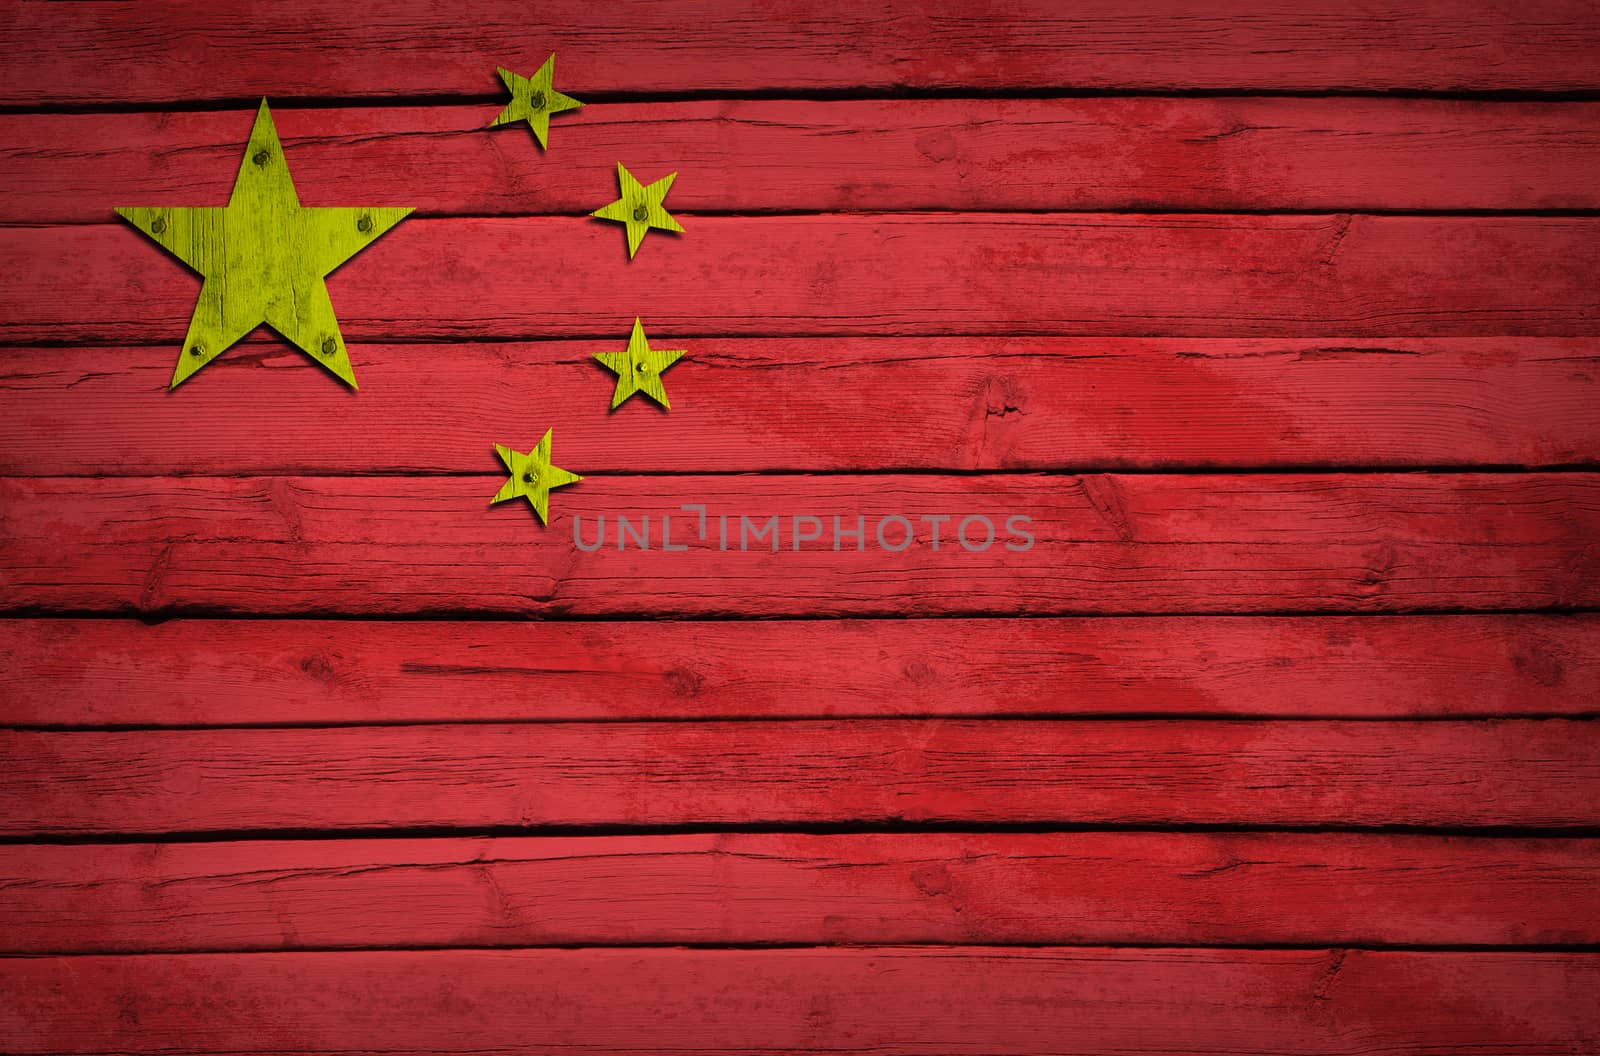 China flag painted on wooden boards. Grunge style